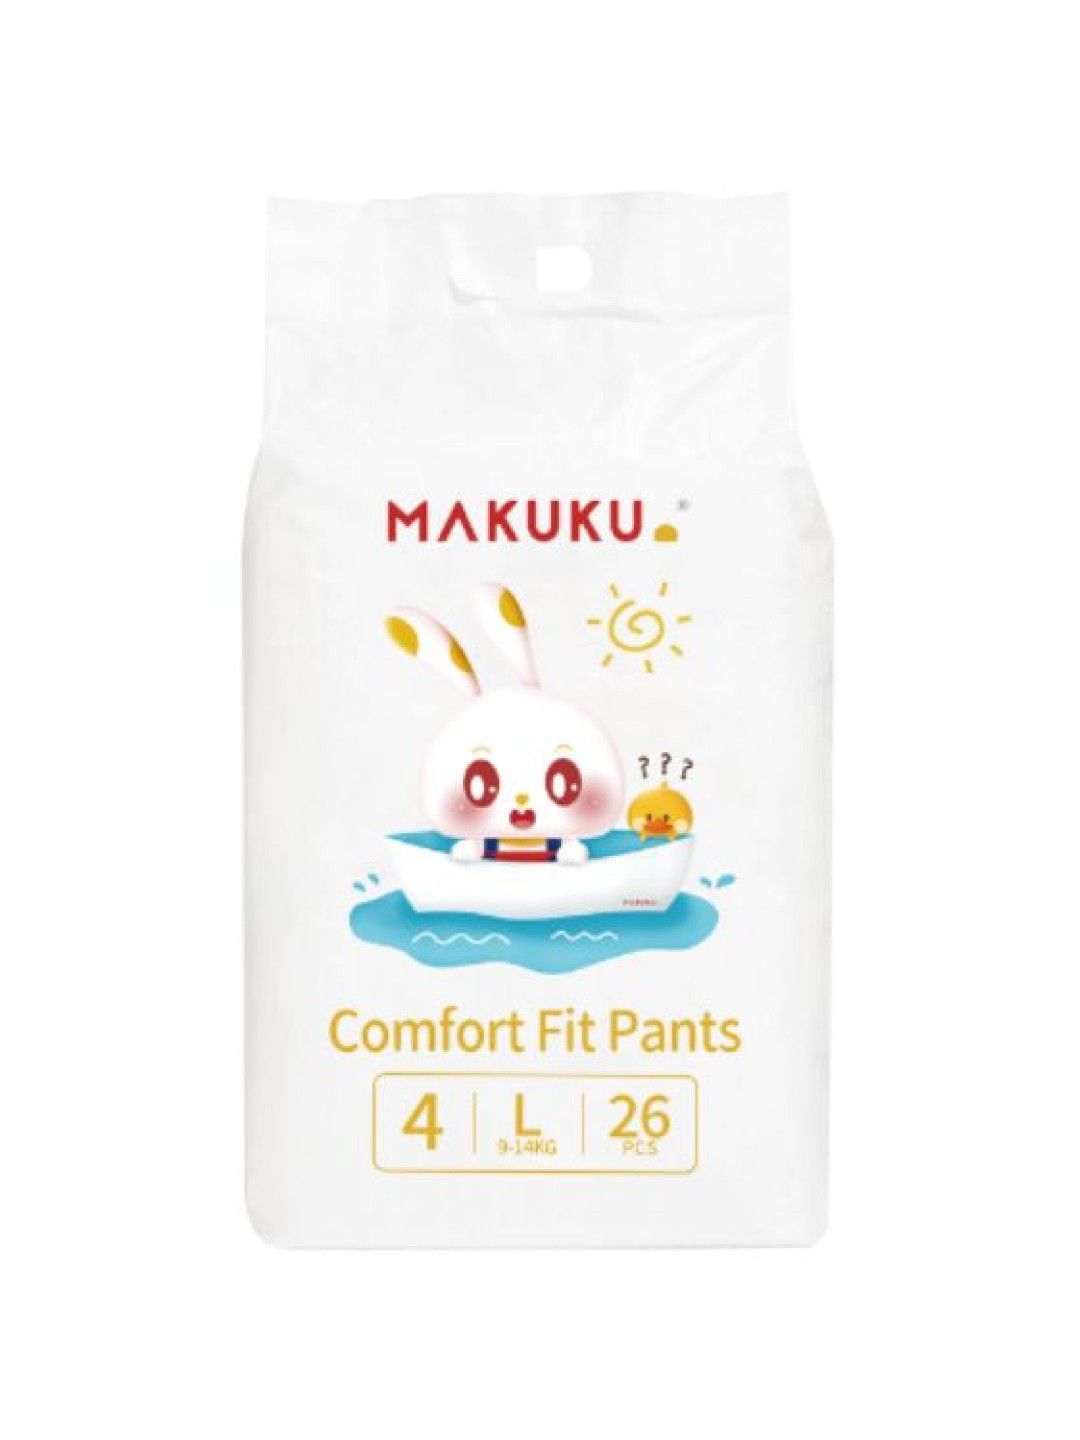 Makuku Baby Soft and Breathable Comfort Fit Diaper Pants, Large (26s)